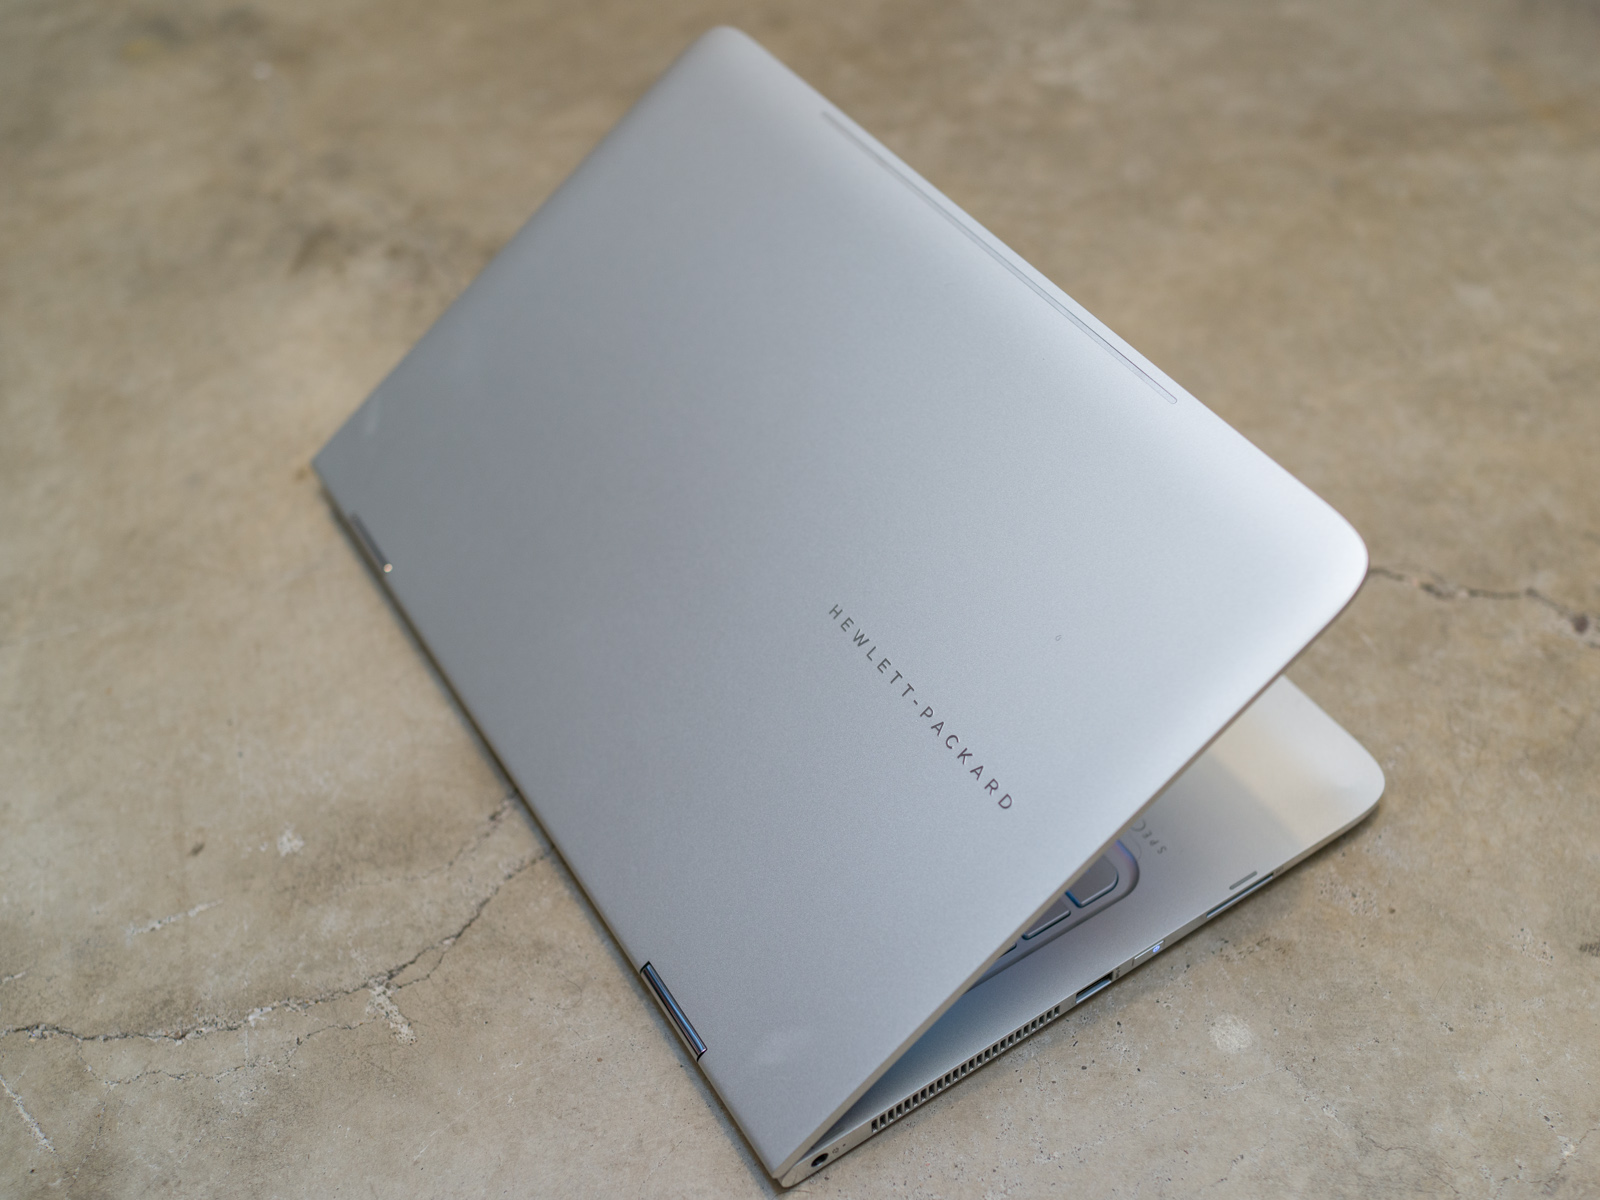 You May Not Notice The Antennae Strip On The Top Edge - Hewlett Packard Spectre X360 - HD Wallpaper 